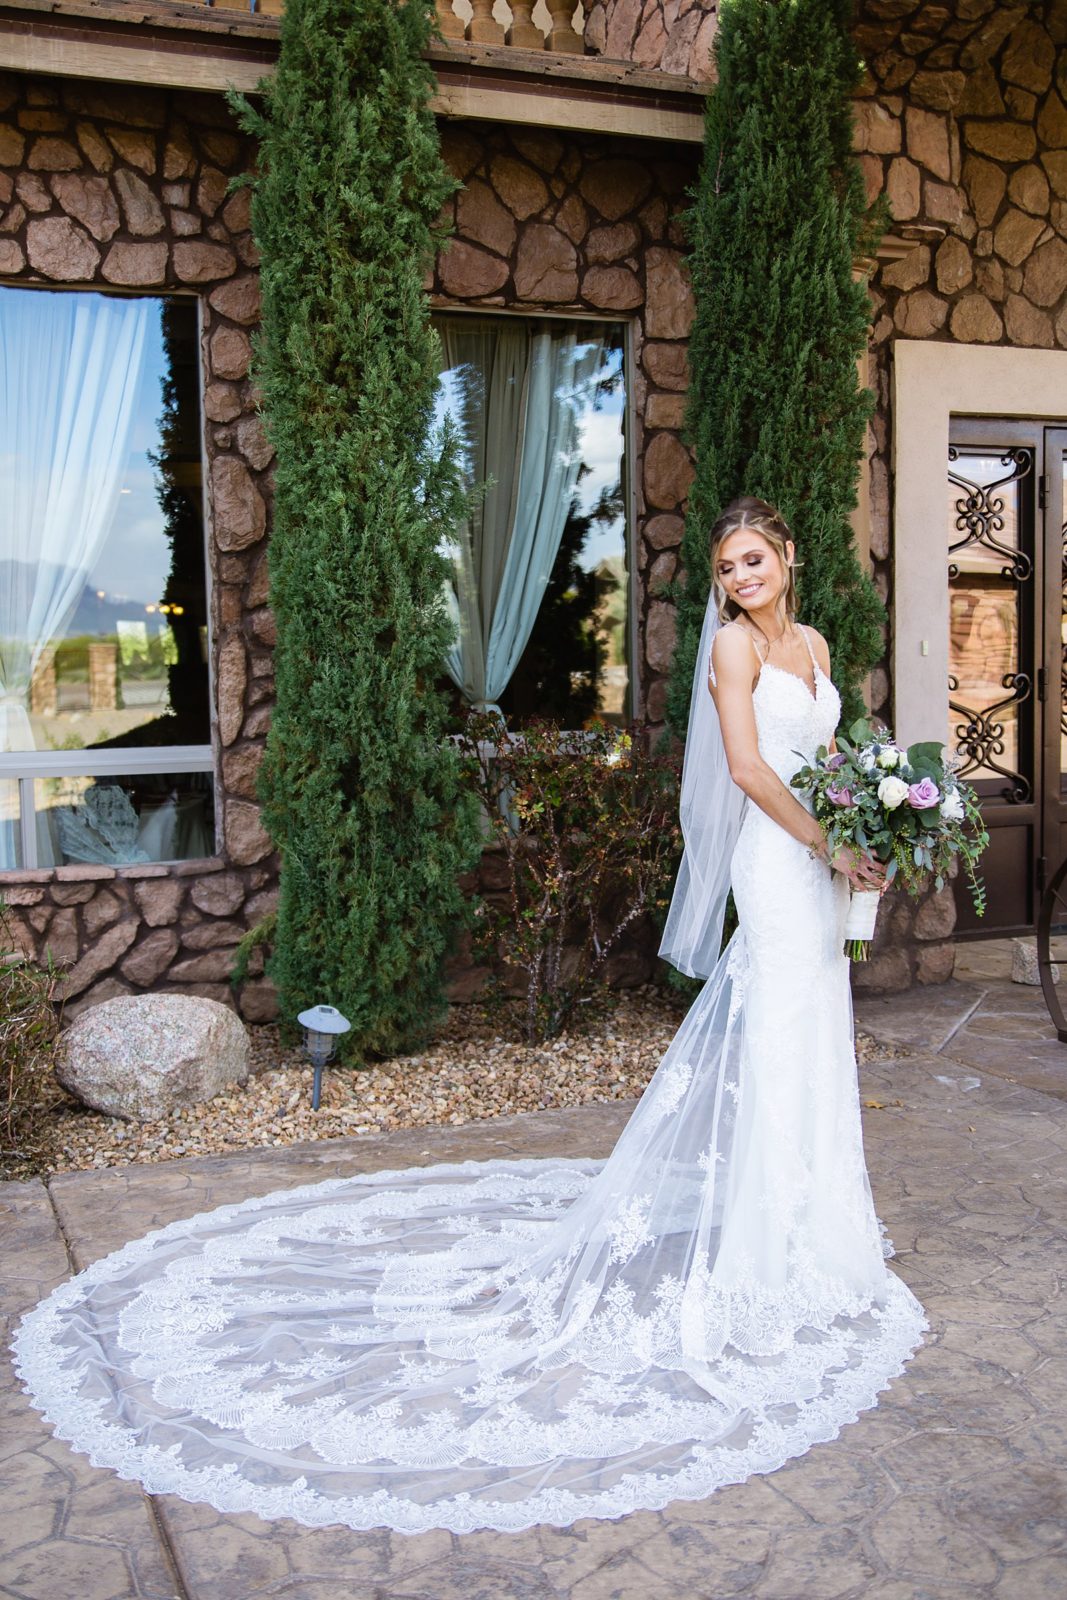 Bride in her romantic mermaid style wedding dress with beautiful lace train by Mesa wedding photographer PMA Photography.